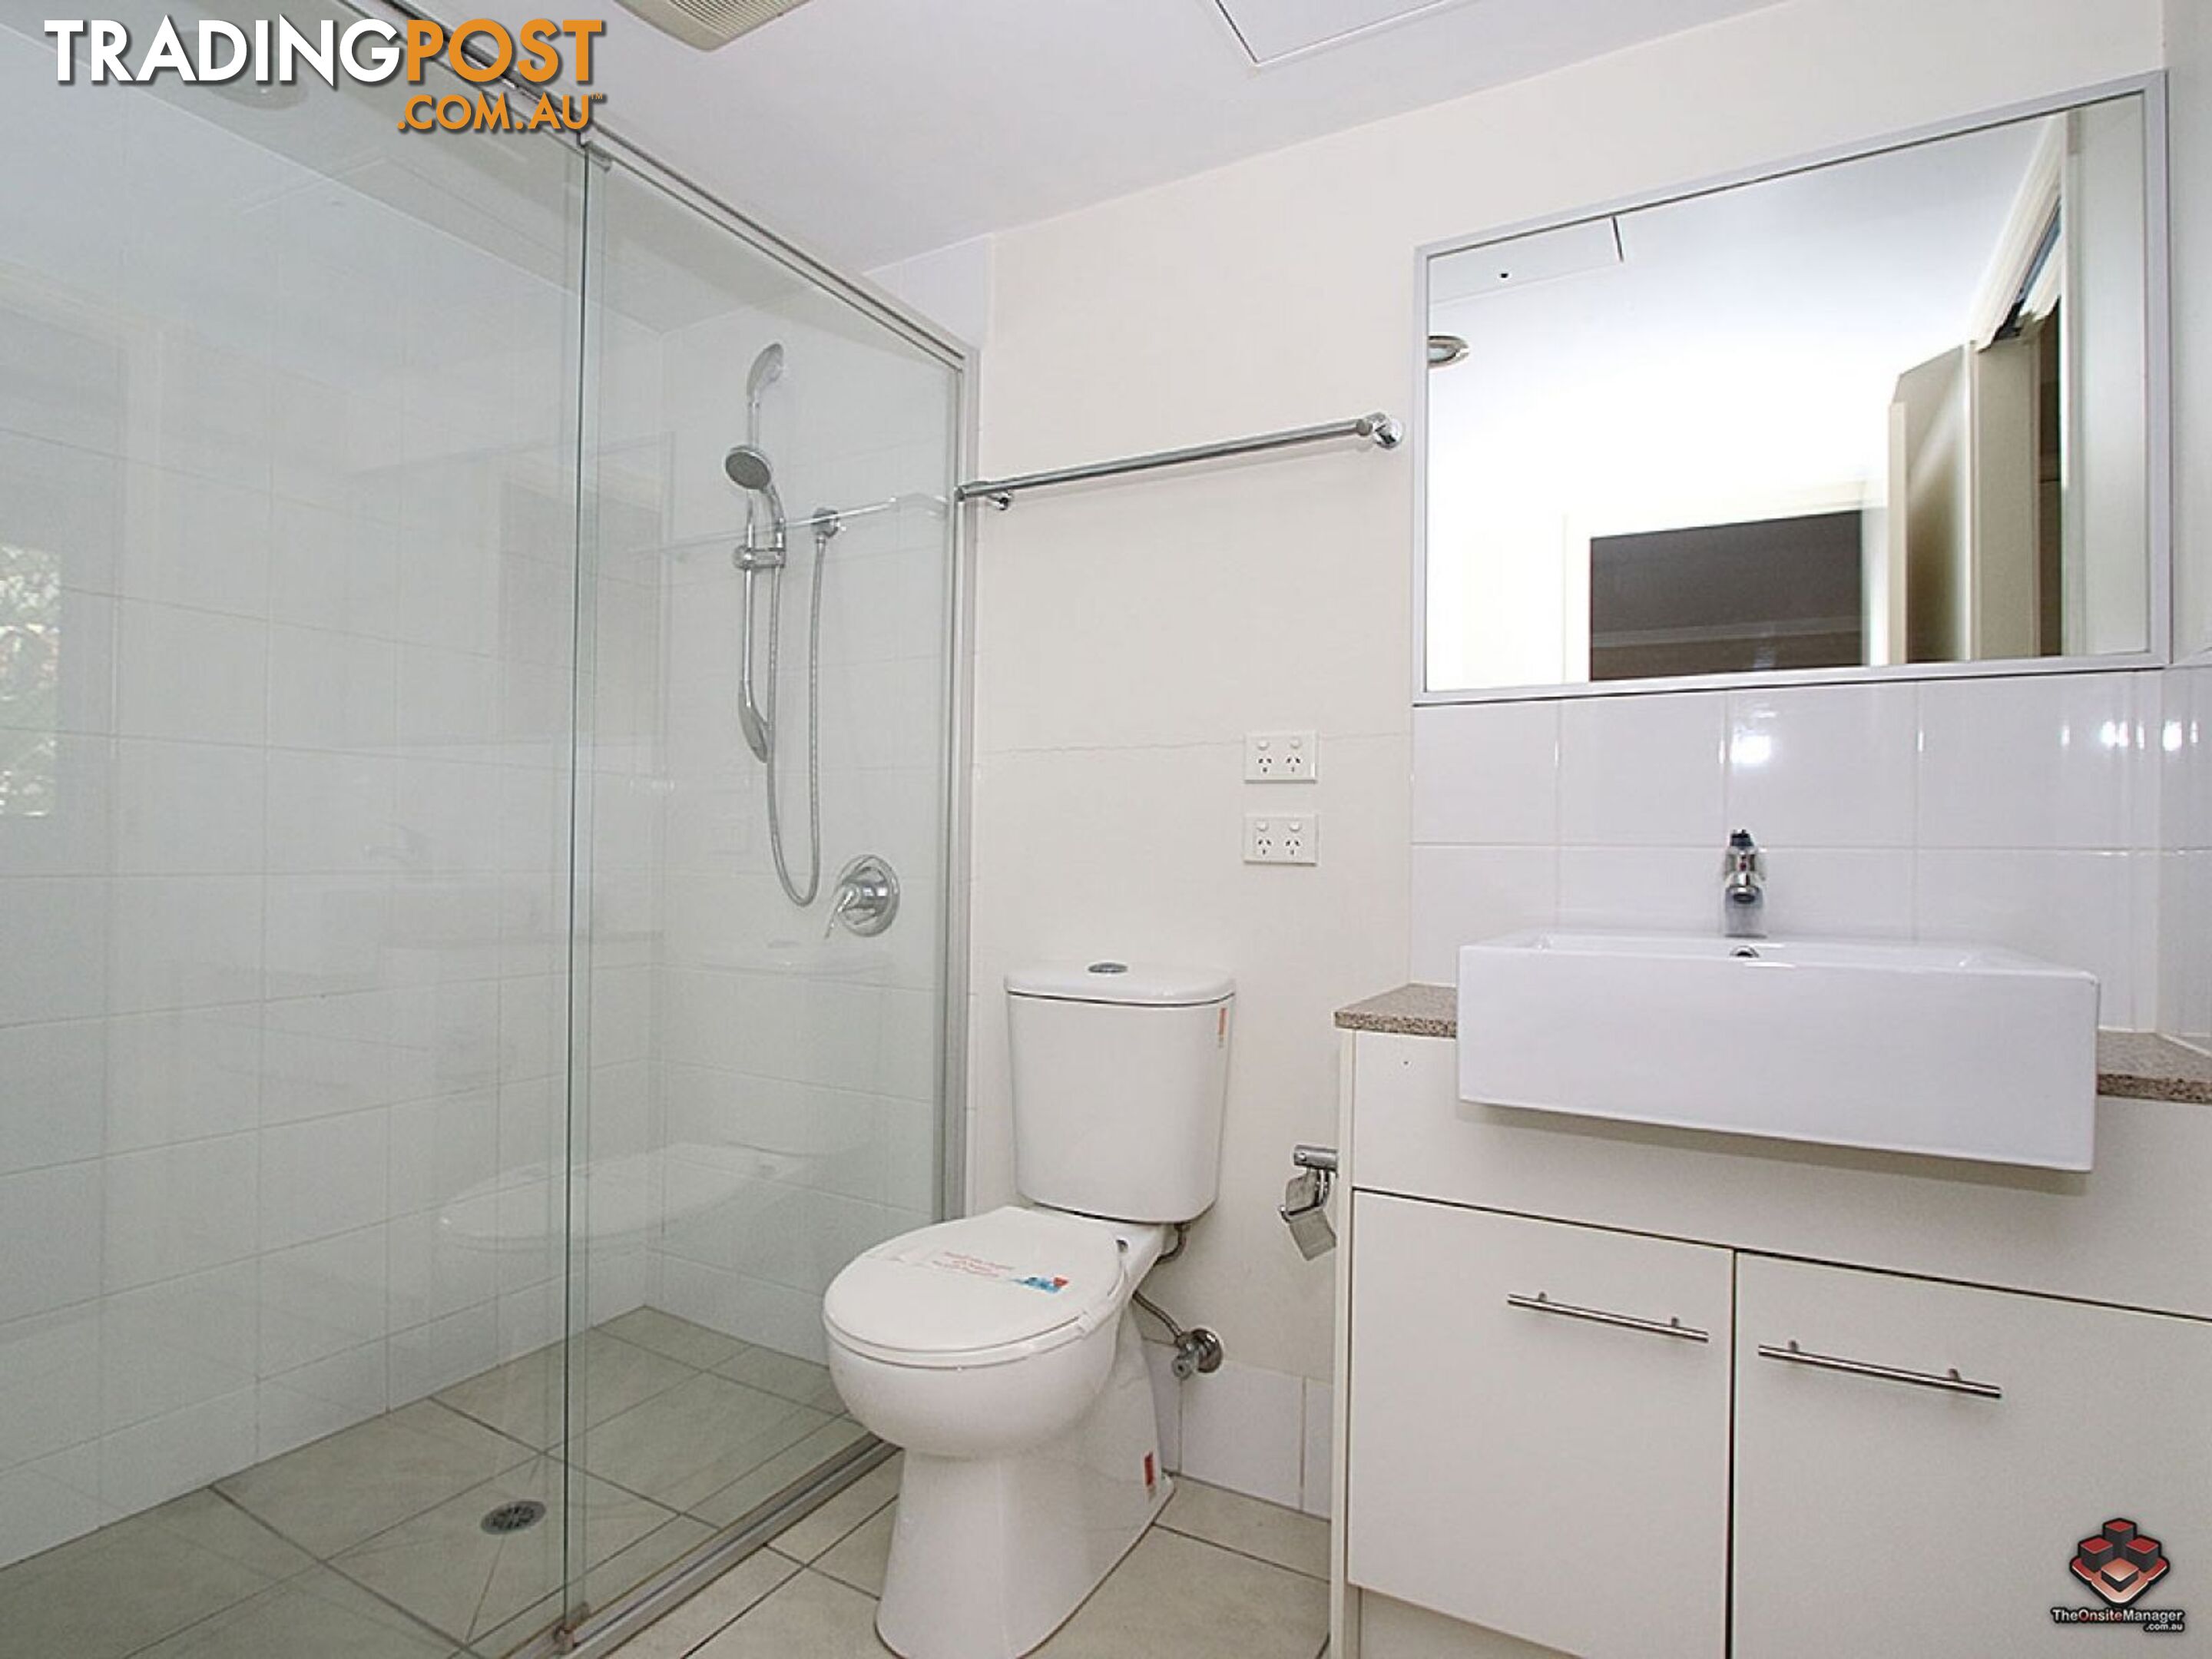 14/223 Tufnell Road Banyo QLD 4014